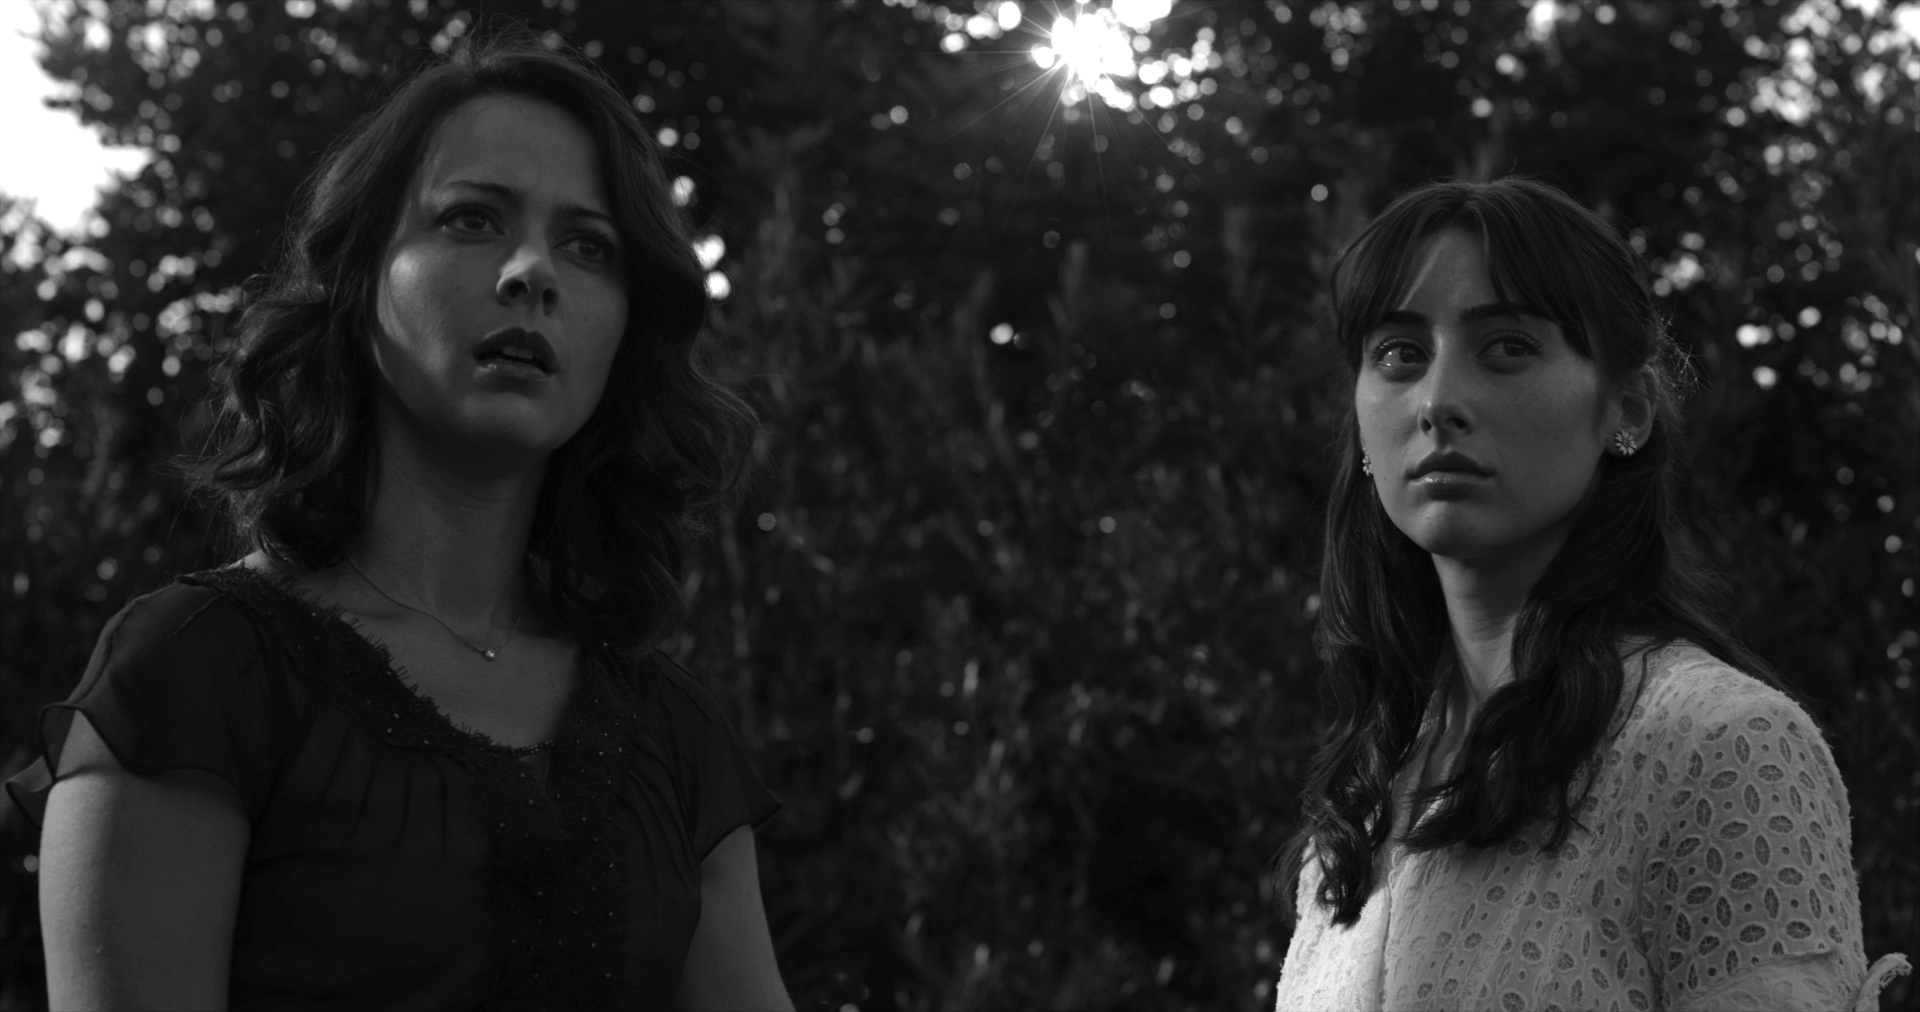 Still of Amy Acker and Jillian Morgese in Much Ado About Nothing (2012)